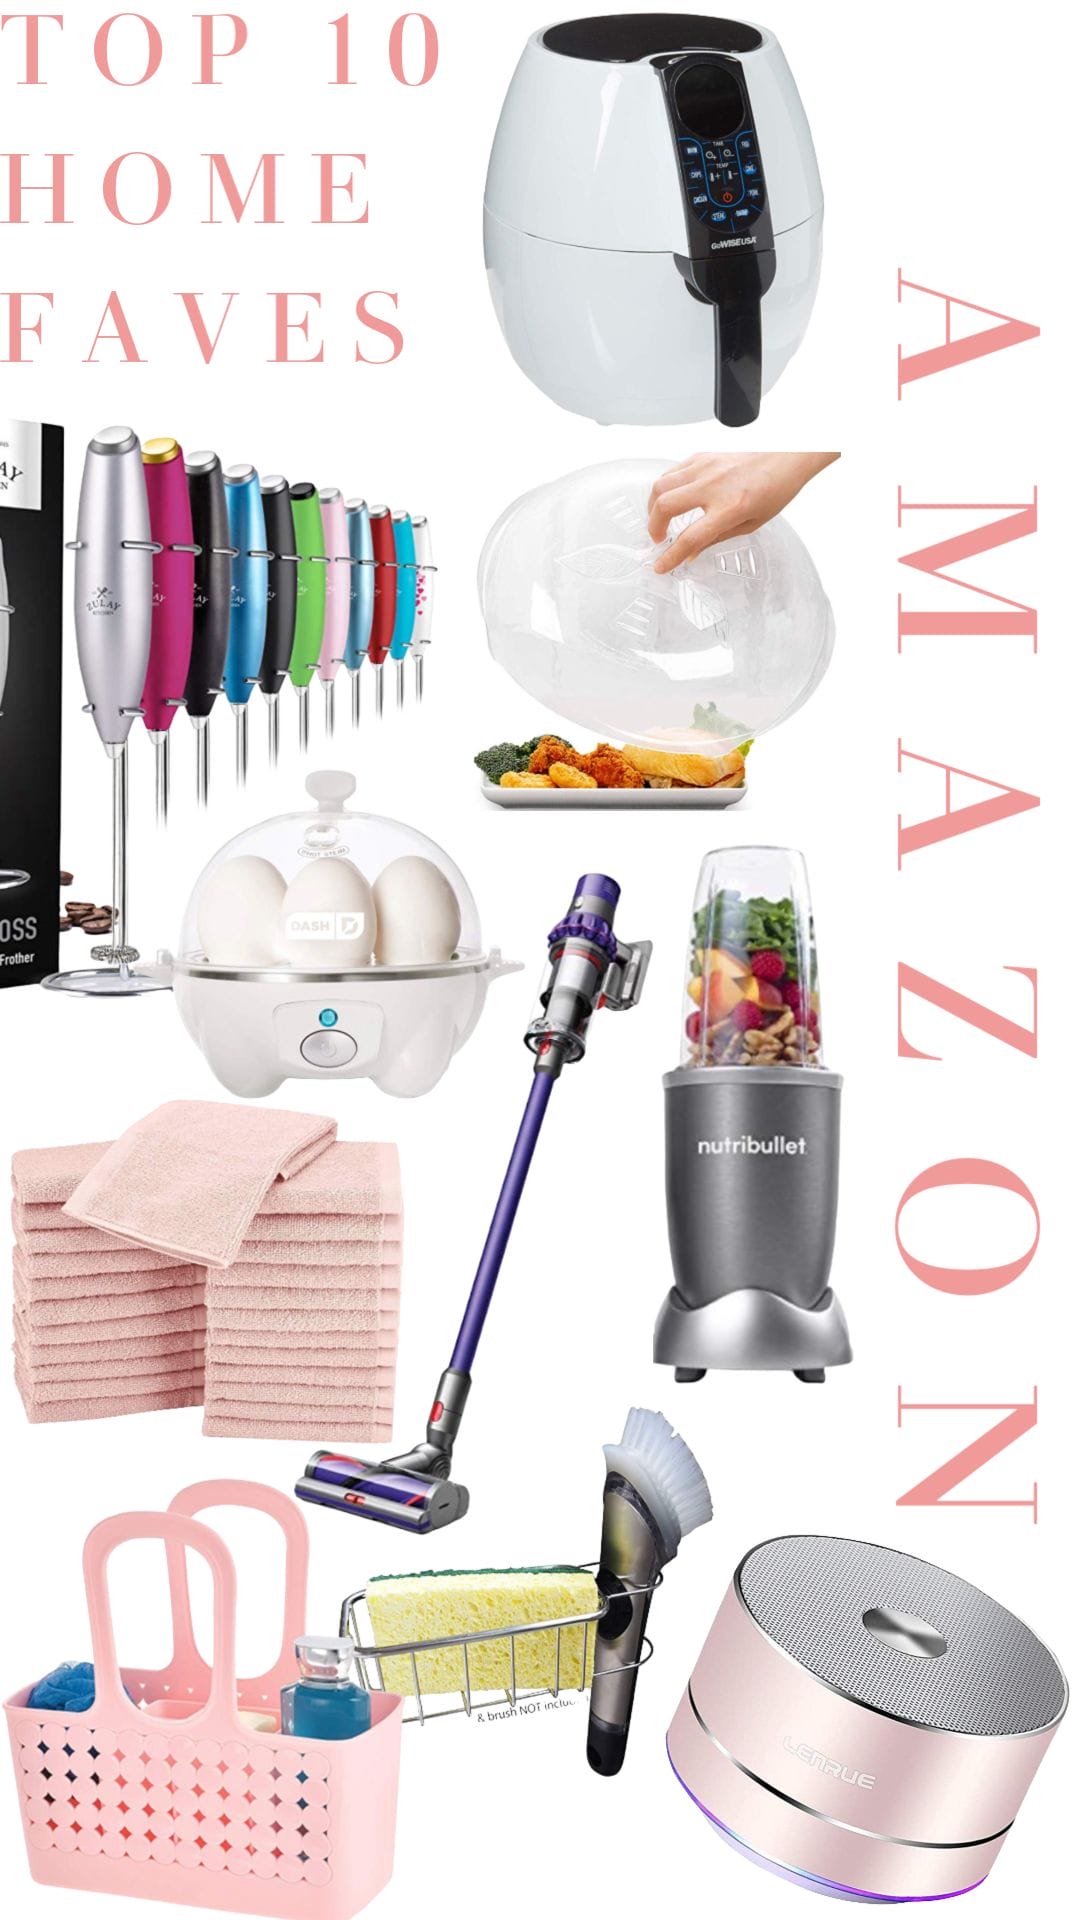 10 Amazon Faves | Home Edition